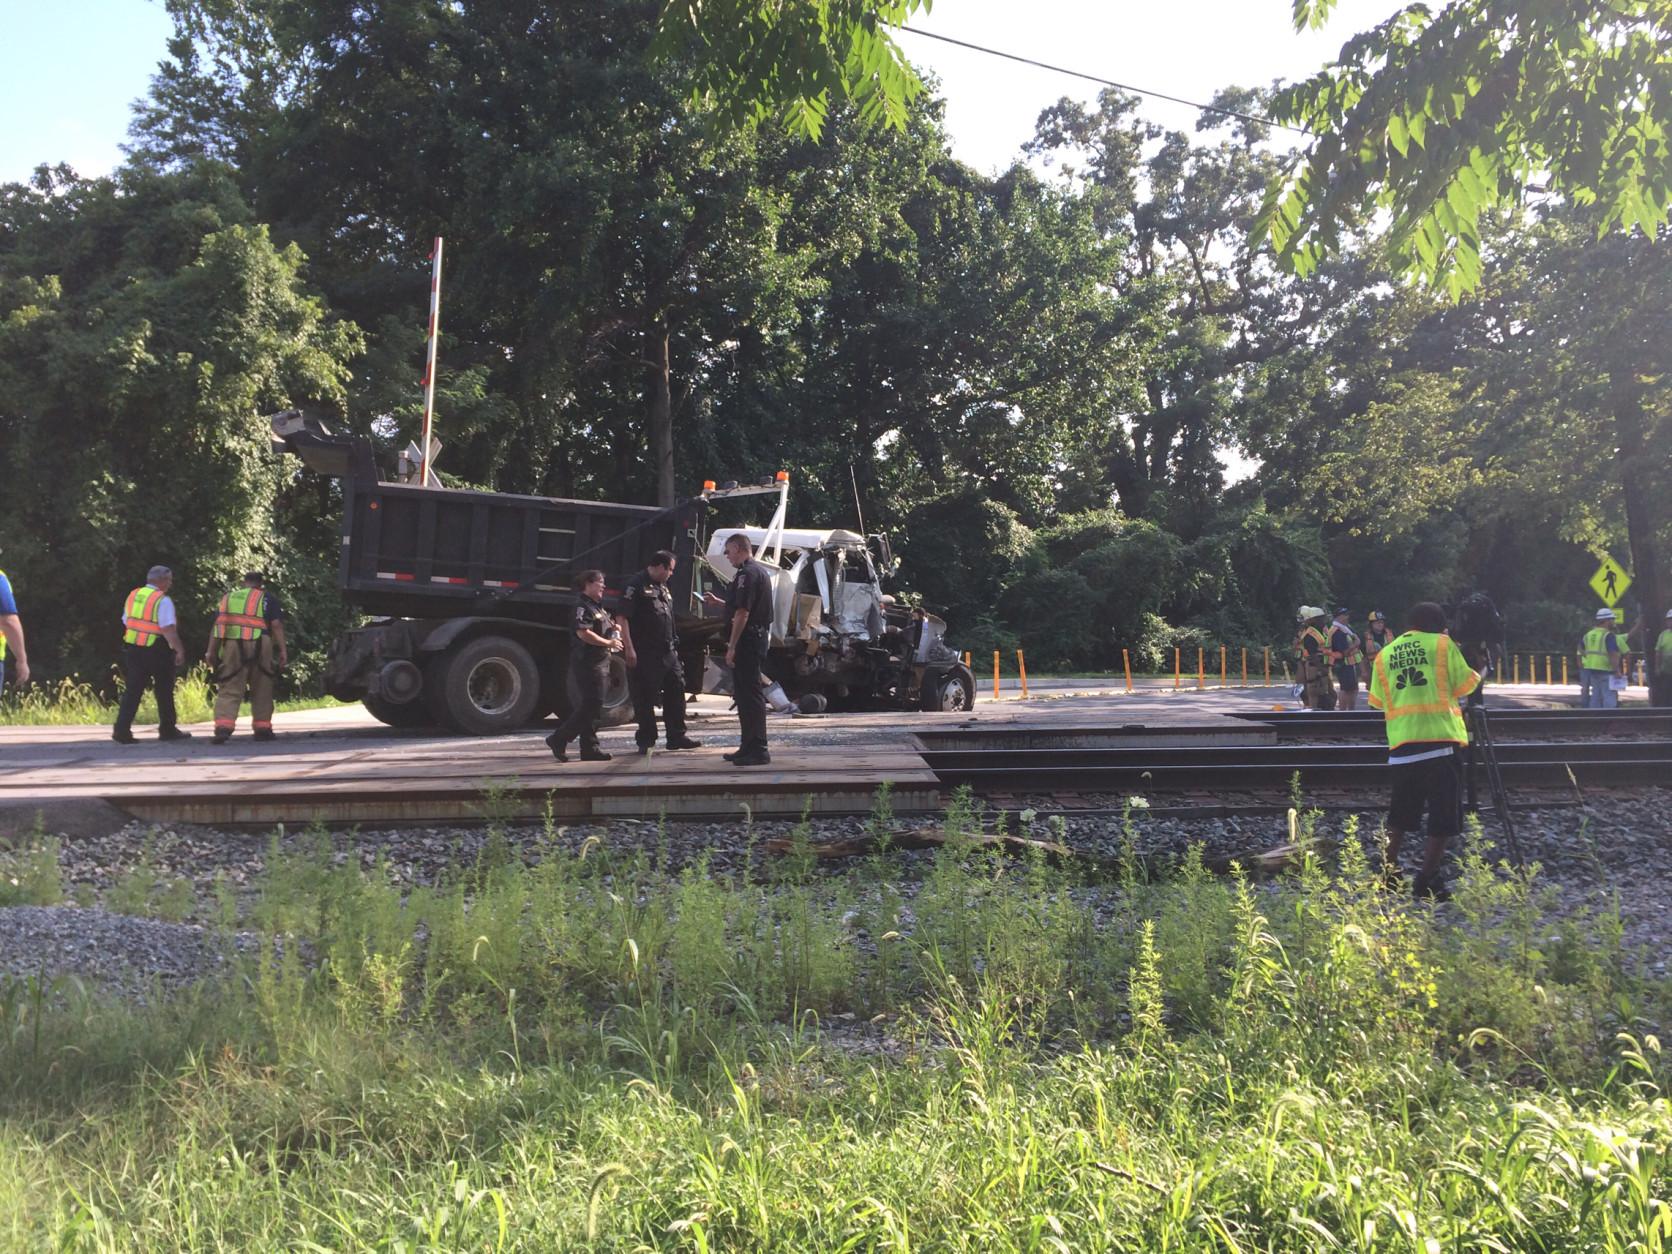 A MARC maintenance truck was struck by a train Monday afternoon. (Courtesy Tricia Steadman)